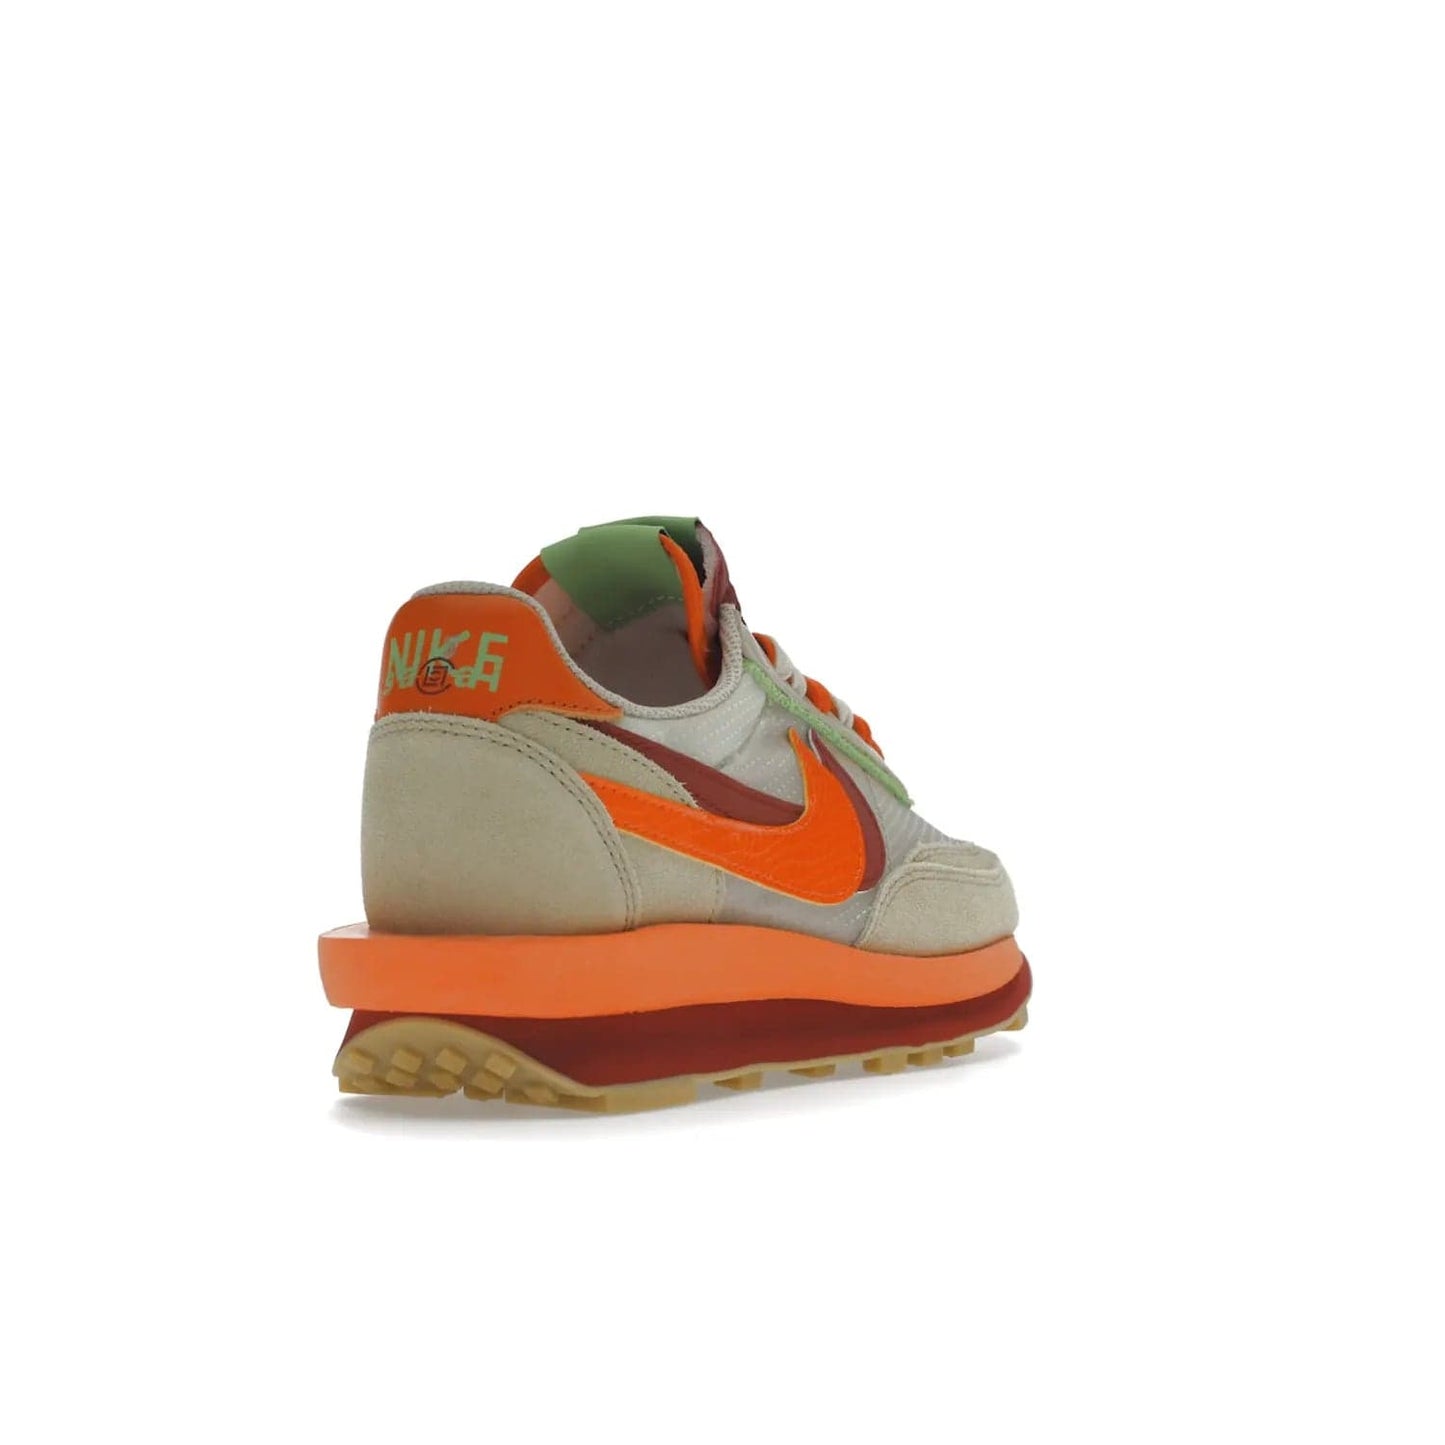 Nike LD Waffle sacai CLOT Kiss of Death Net Orange Blaze - Image 31 - Only at www.BallersClubKickz.com - A bold and stylish Nike LD Waffle sacai CLOT Kiss of Death Net Orange Blaze sneaker featuring a unique off-white, Deep Red & Orange Blaze Swooshes, two-toned stacked sole and doubled tongue. Available in September 2021. Make a statement.